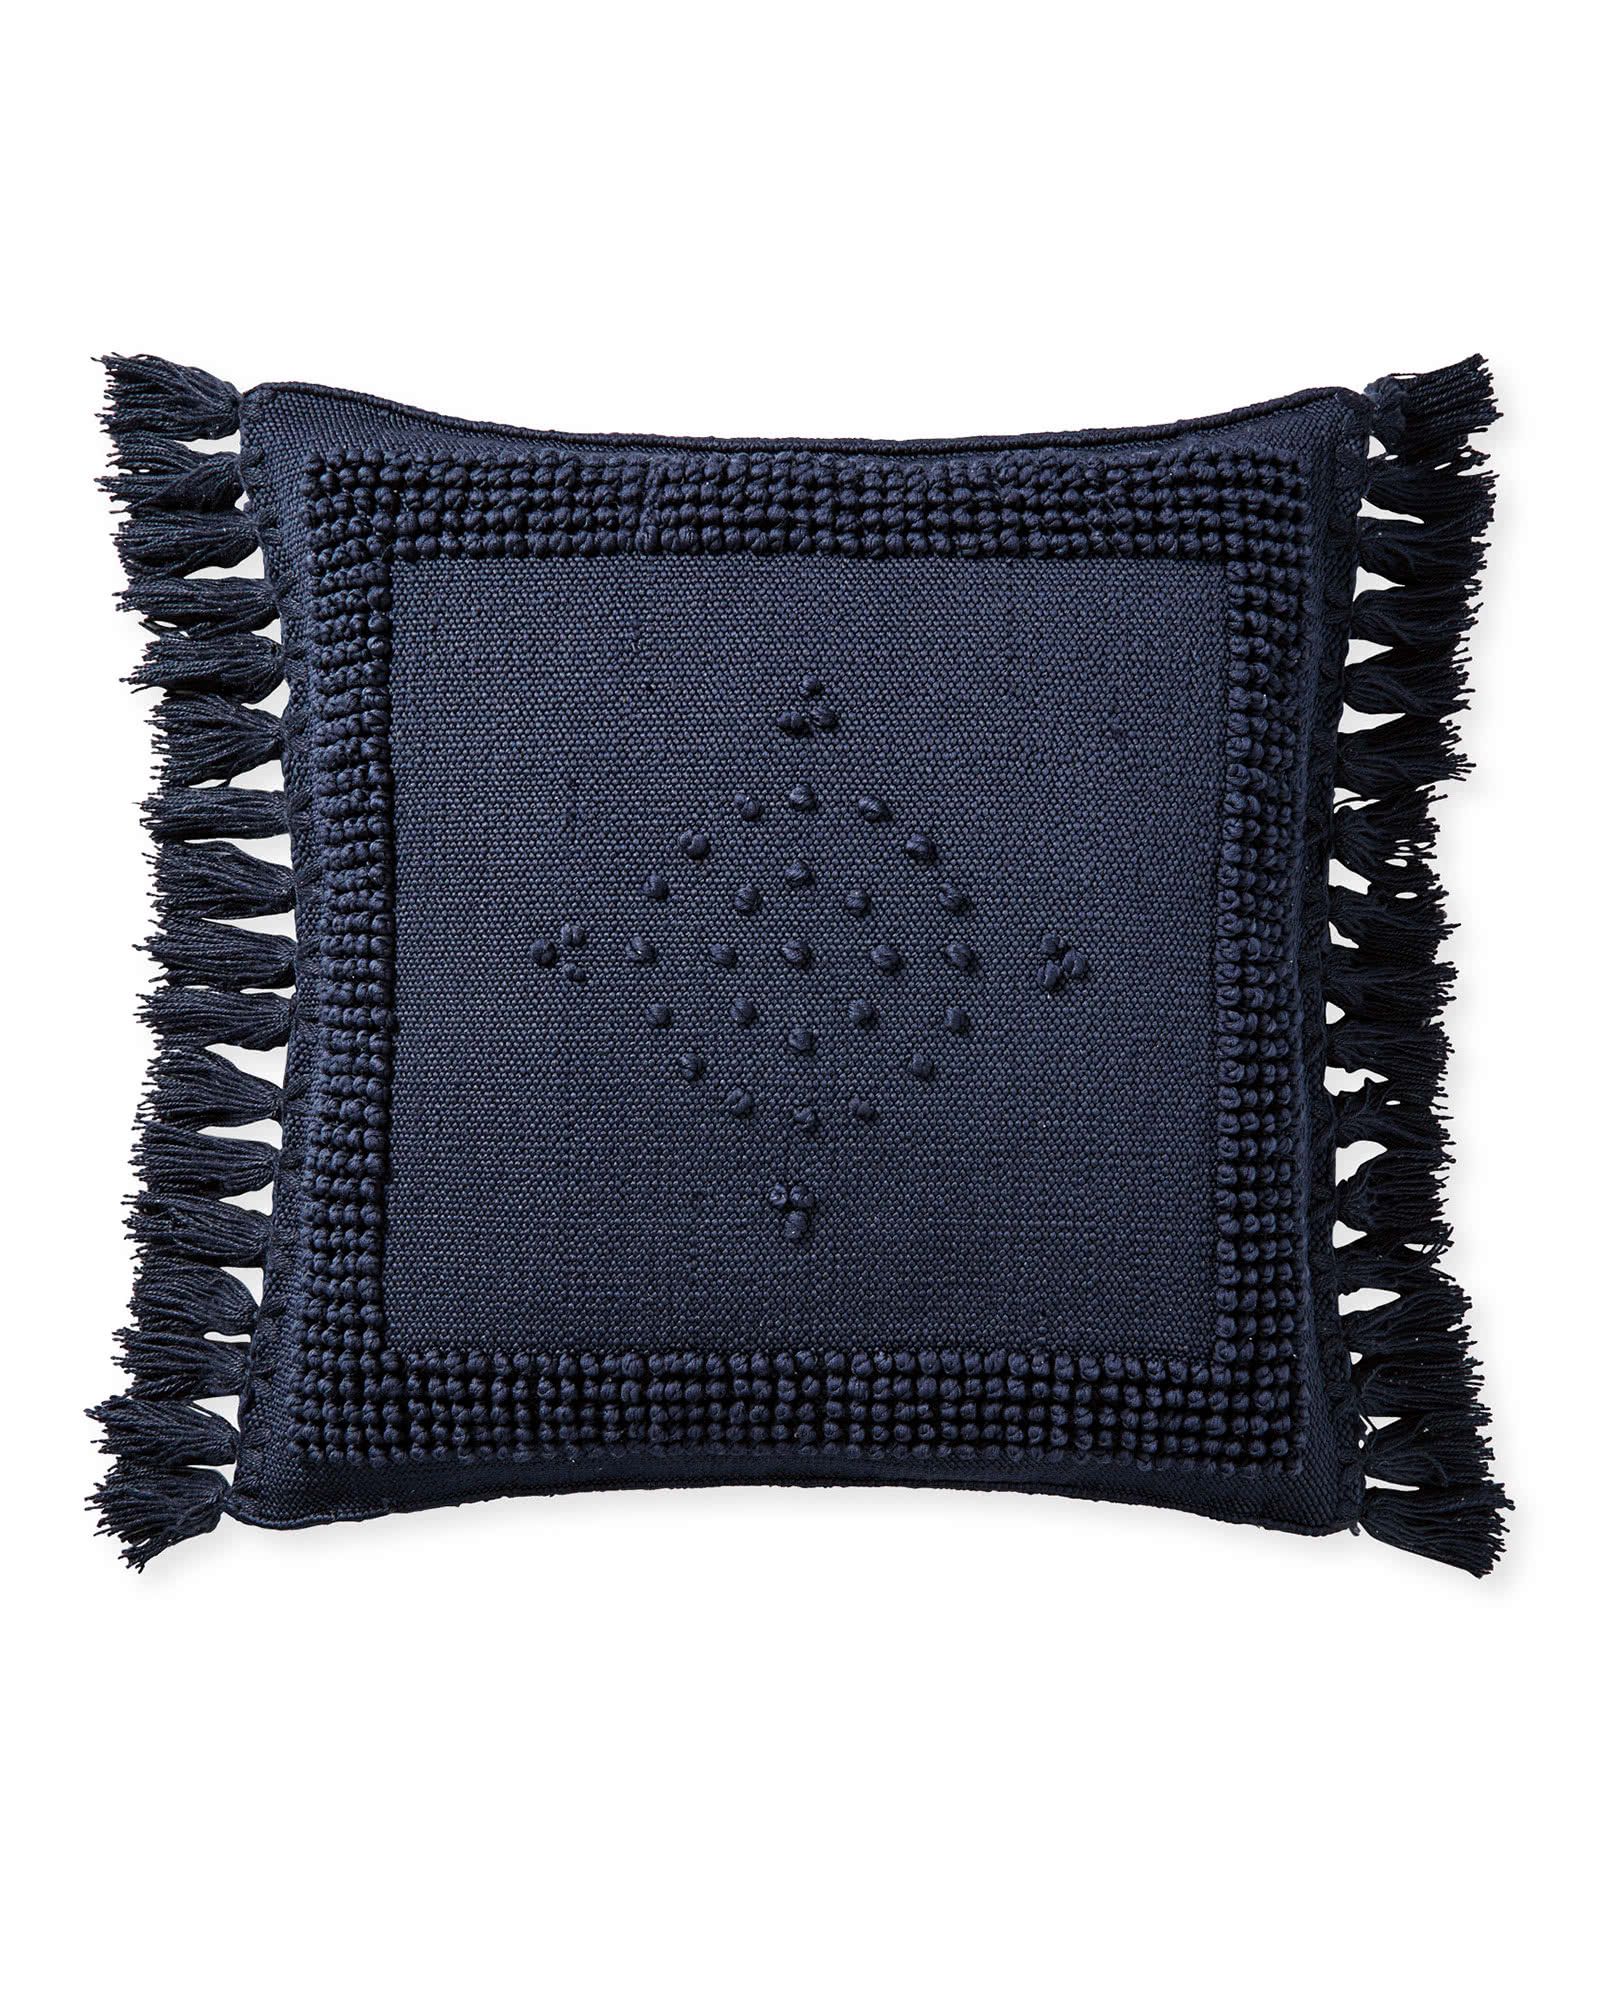 Montecito Pillow Cover | Serena and Lily